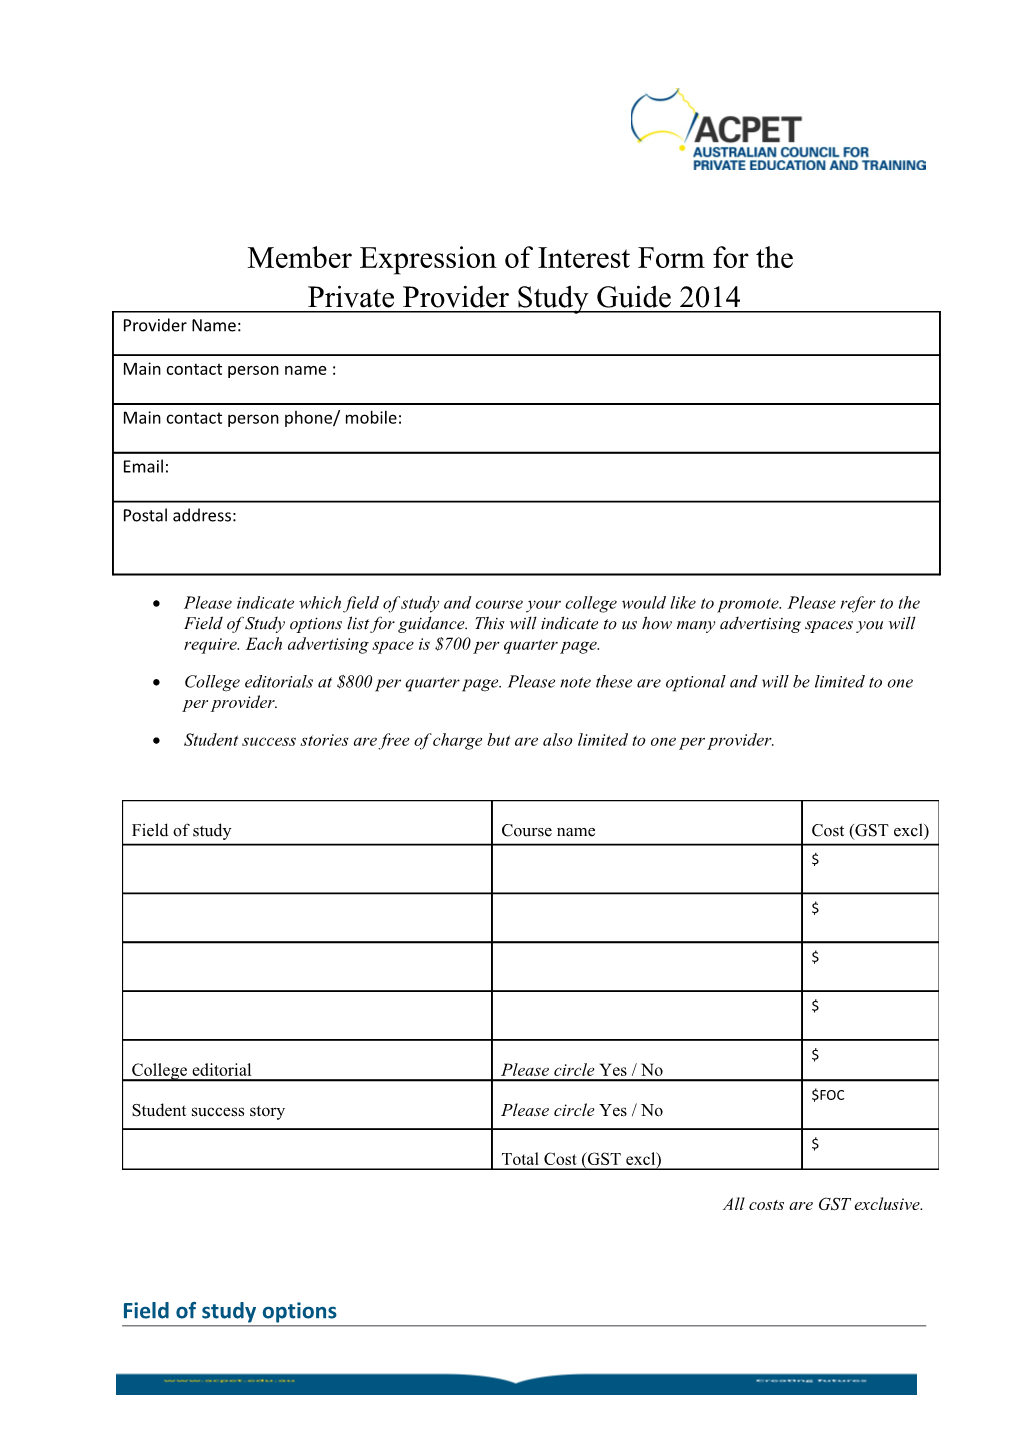 Member Expression of Interest Form for The